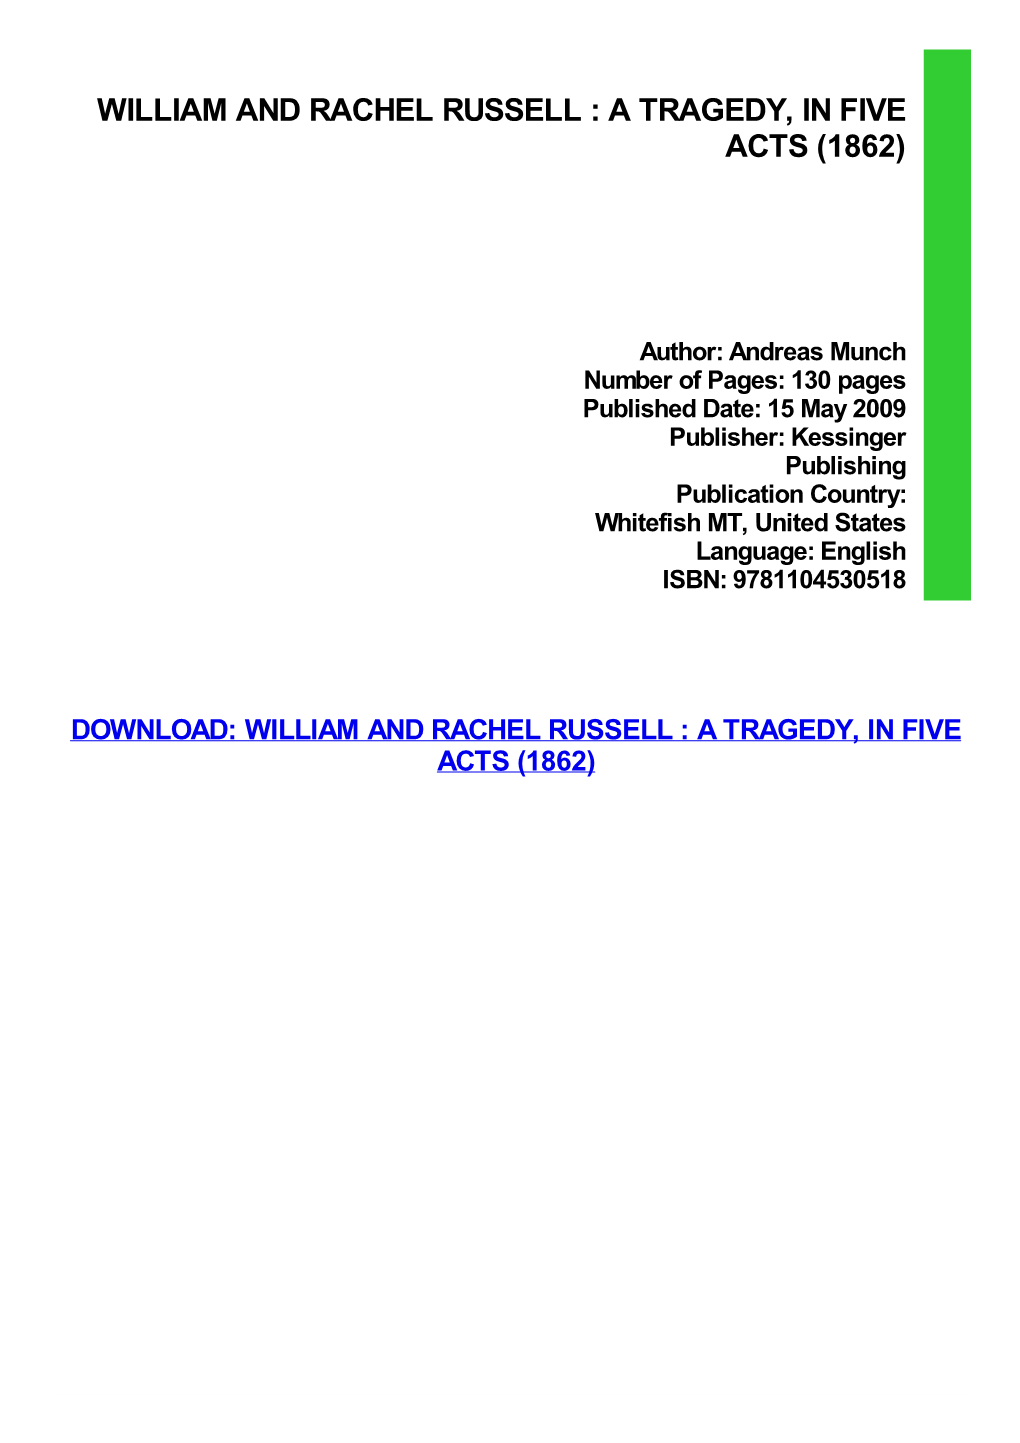 William and Rachel Russell : a Tragedy, in Five Acts (1862)